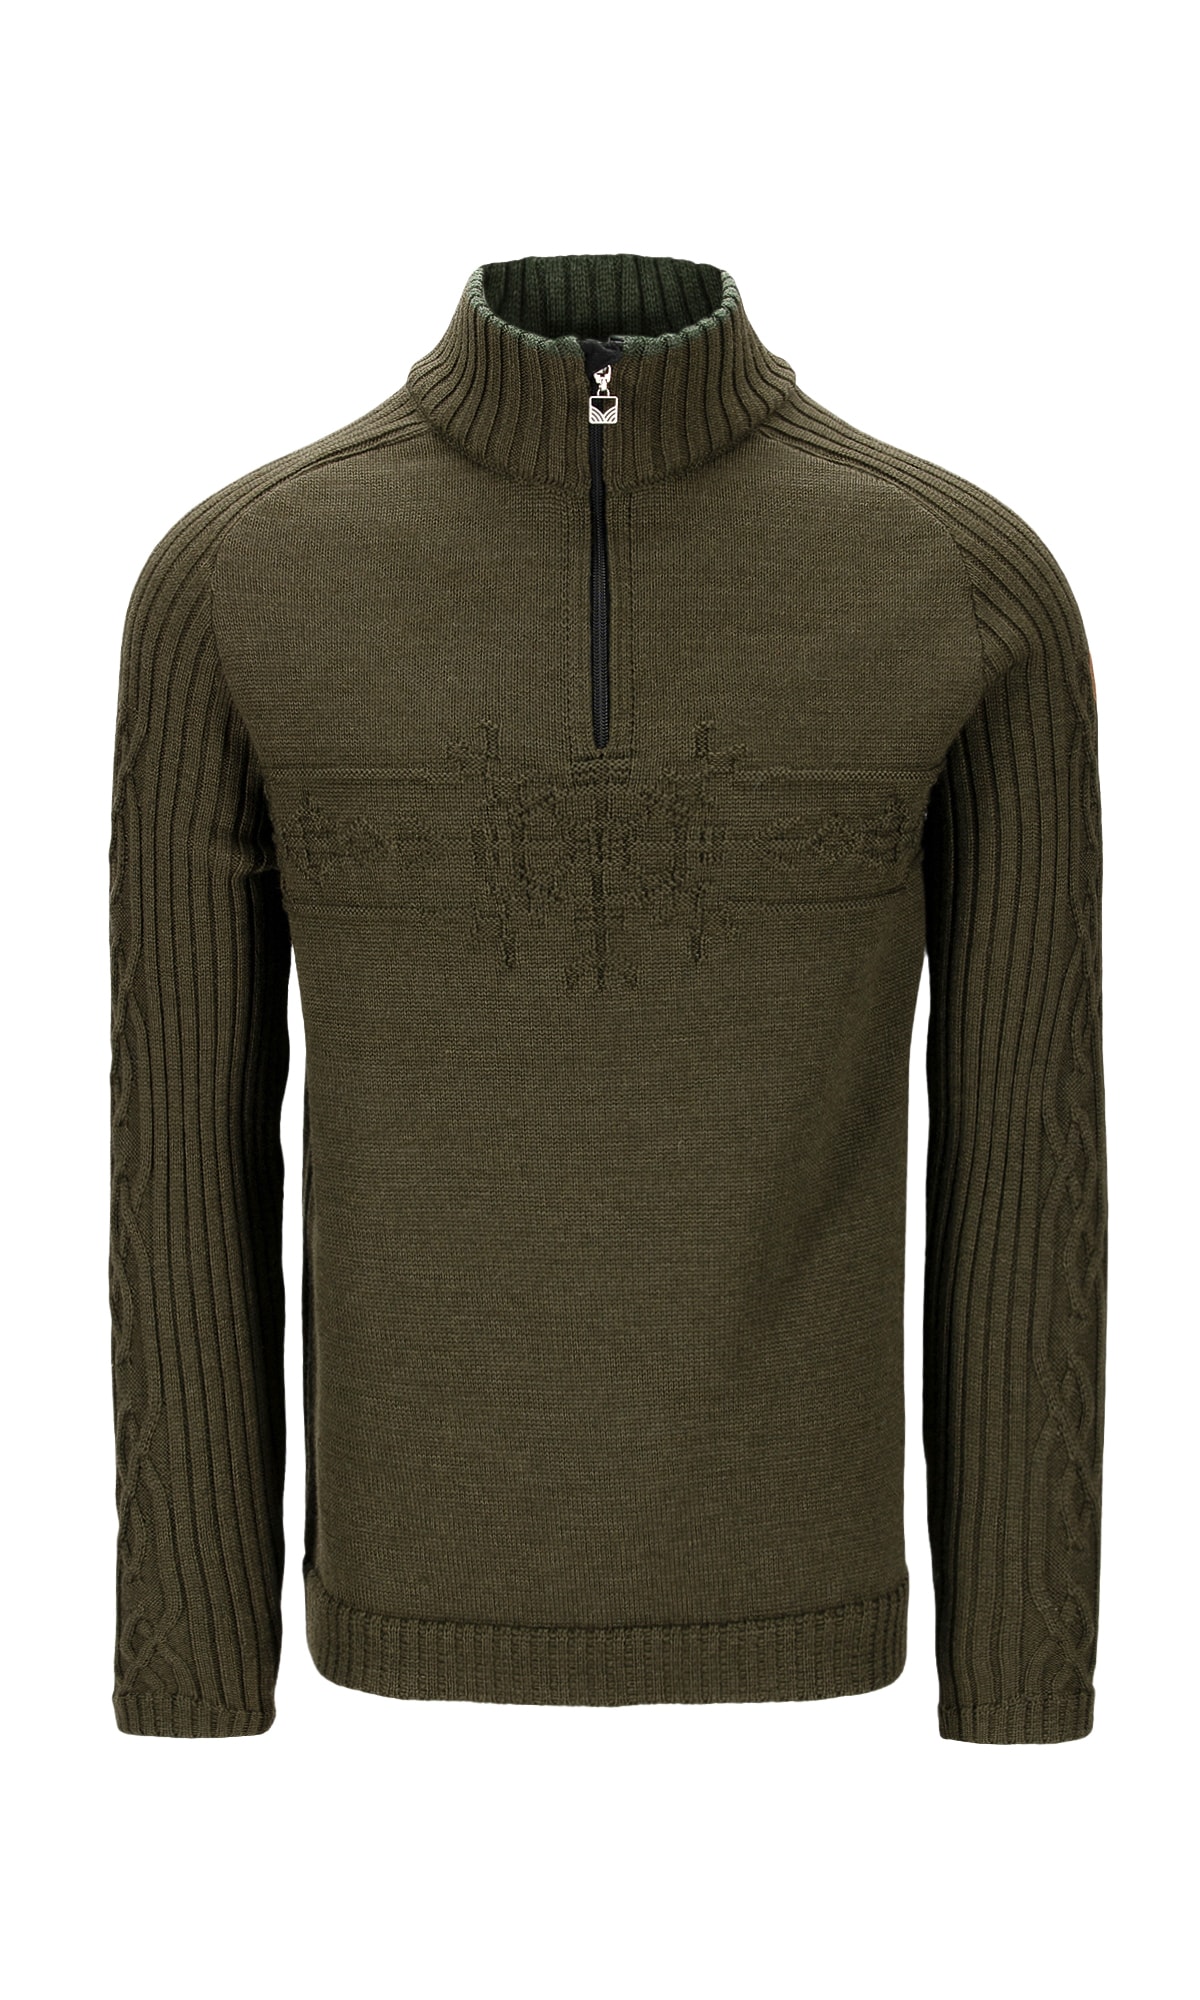 Vegvisir Masc Sweater Army green of Norway